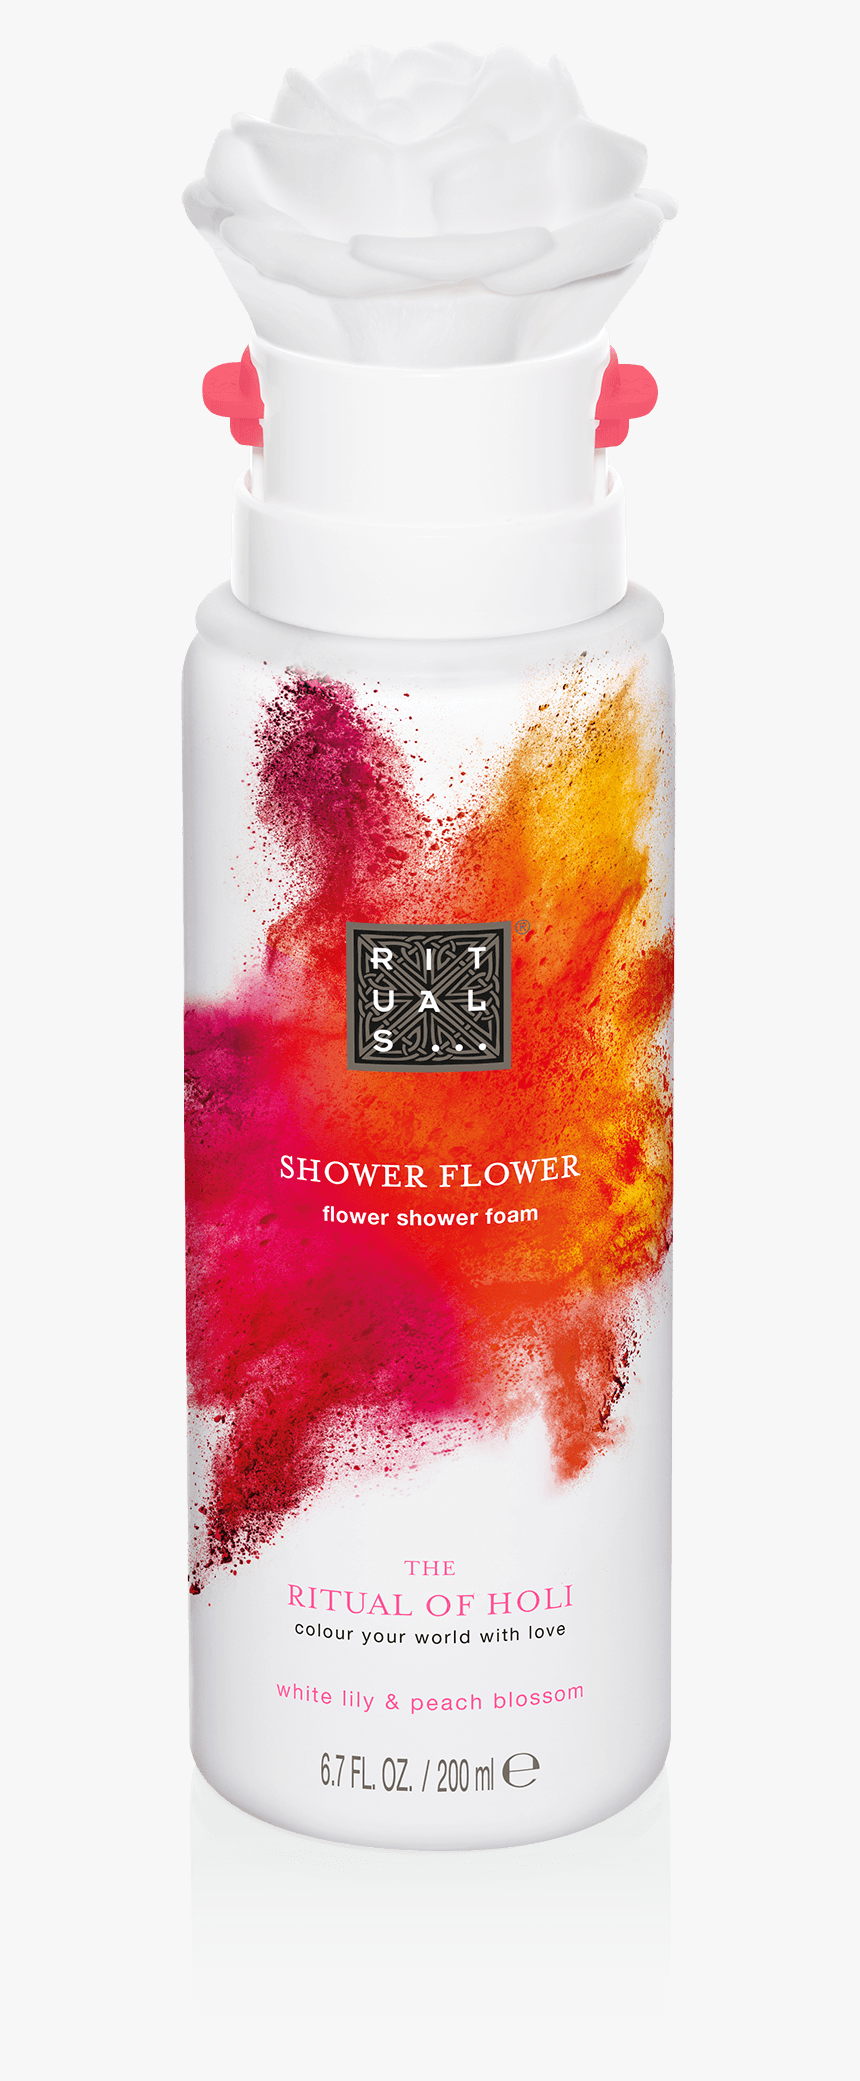 The Ritual Of Holi Shower Foam Flower"
title="the Ritual - Rituals The Ritual Of Holi Shower Foam Flower, HD Png Download, Free Download